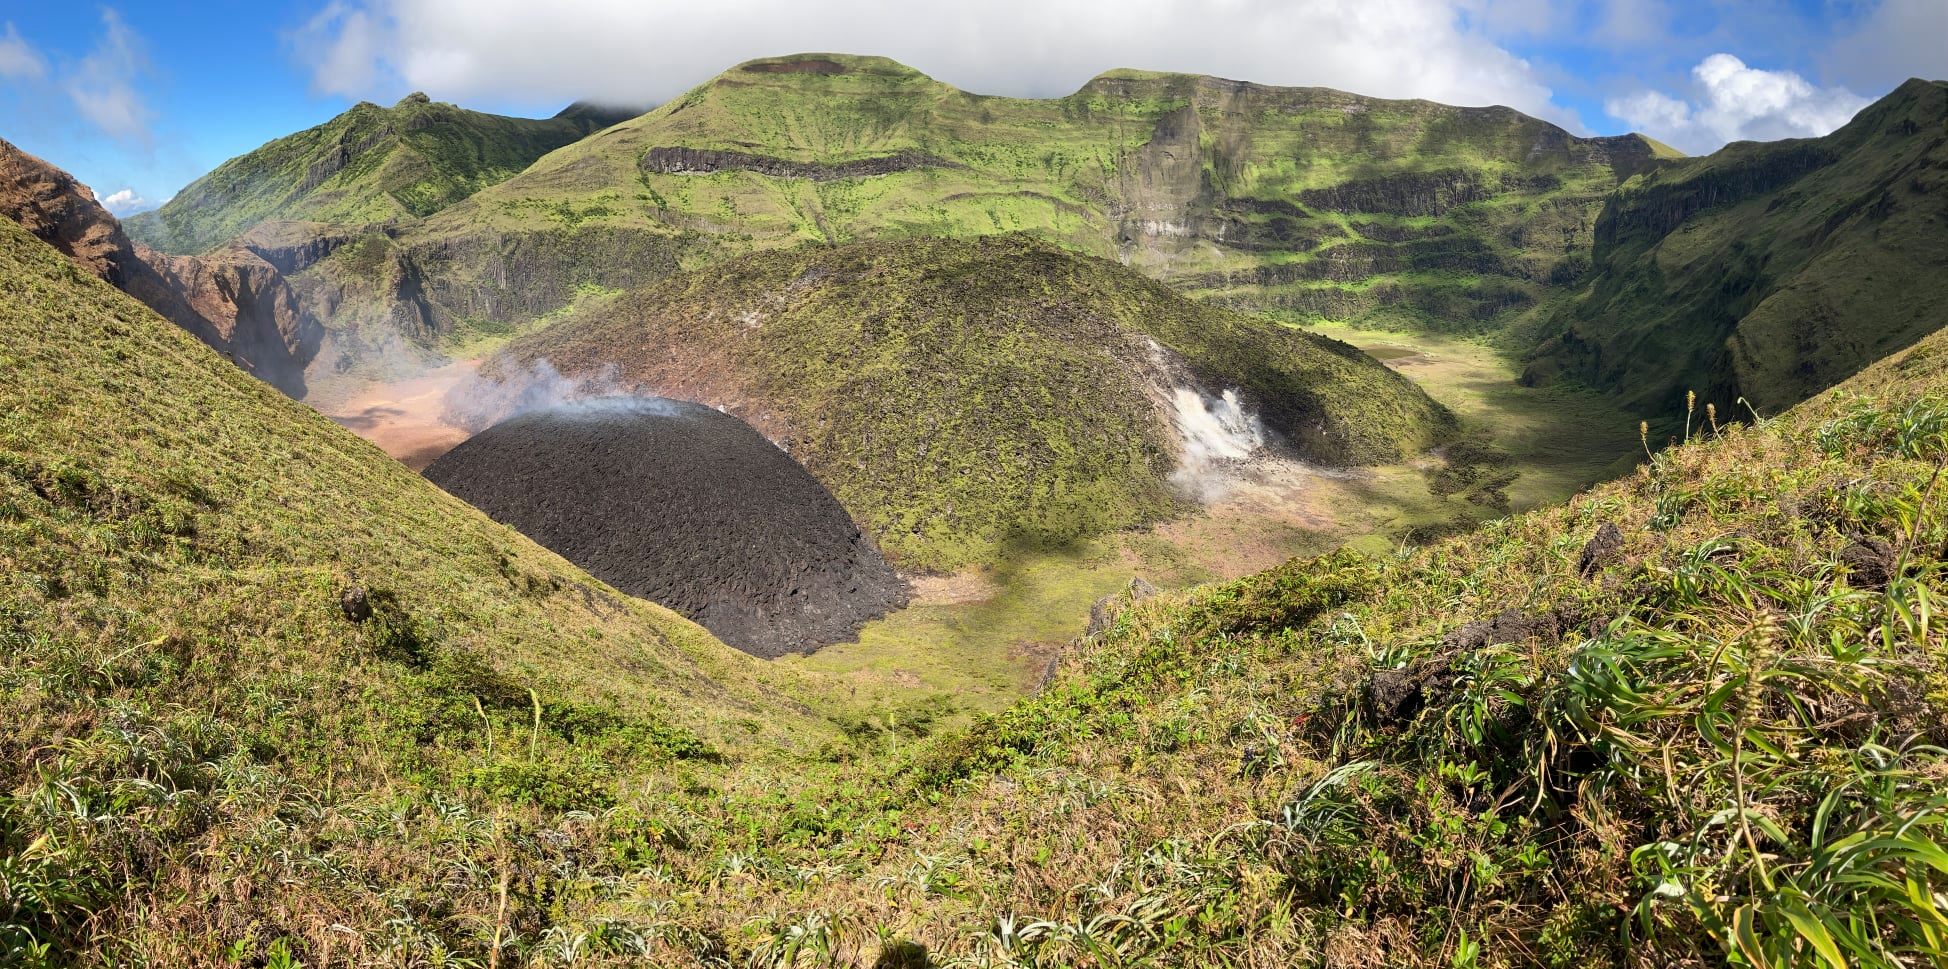 Two Scientists from the Montserrat Volcano Observatory to Join Team in St. Vincent